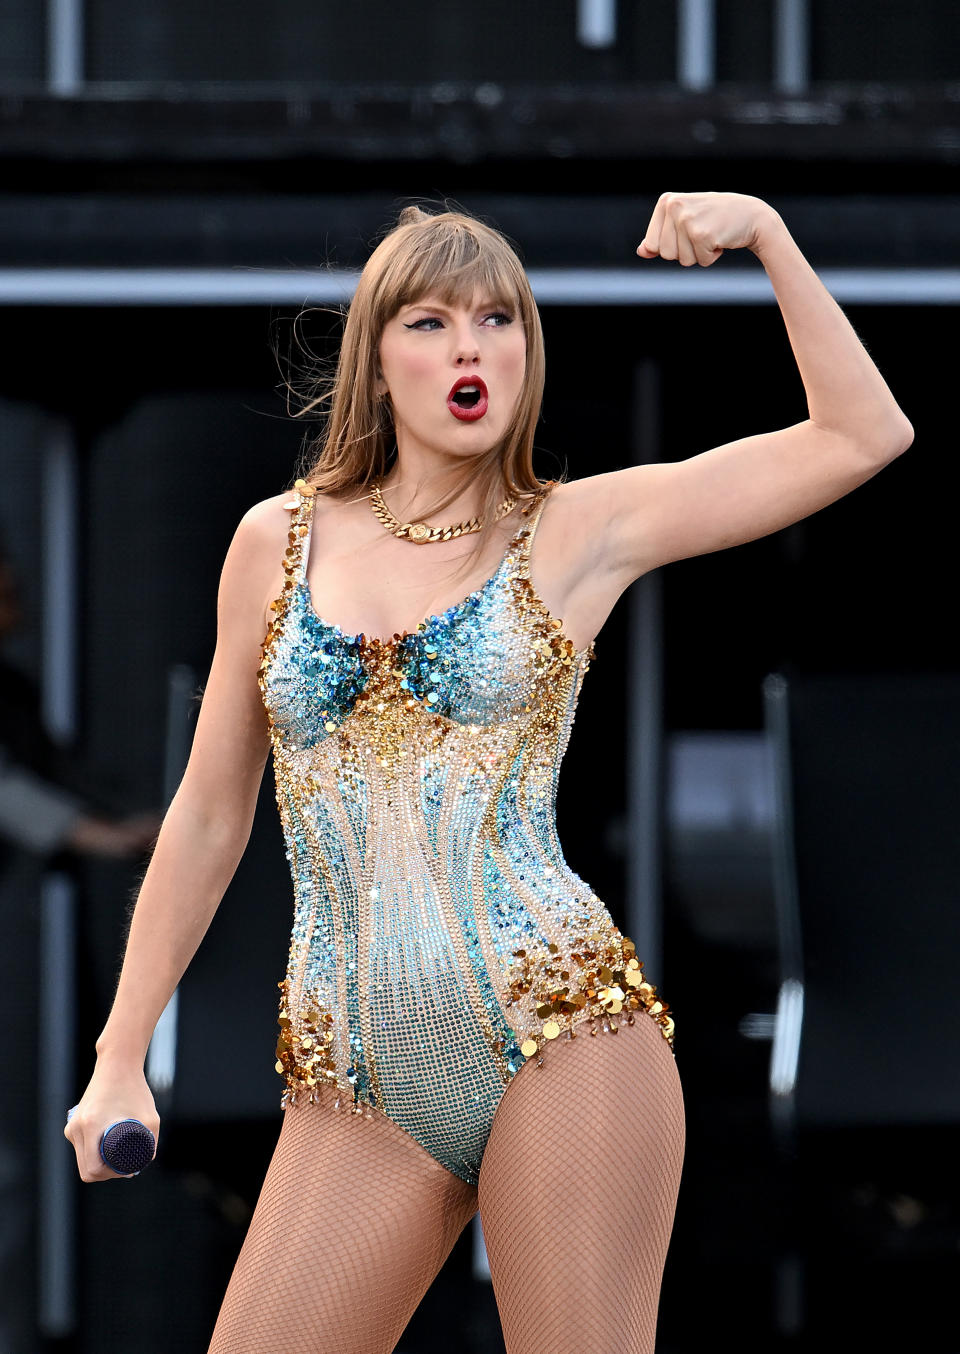 EDINBURGH, SCOTLAND - JUNE 07: EDITORIAL USE ONLY. NO BOOK COVERS. Taylor Swift performs at Scottish Gas Murrayfield Stadium on June 07, 2024 in Edinburgh, Scotland. (Photo by Gareth Cattermole/TAS24/Getty Images for TAS Rights Management )